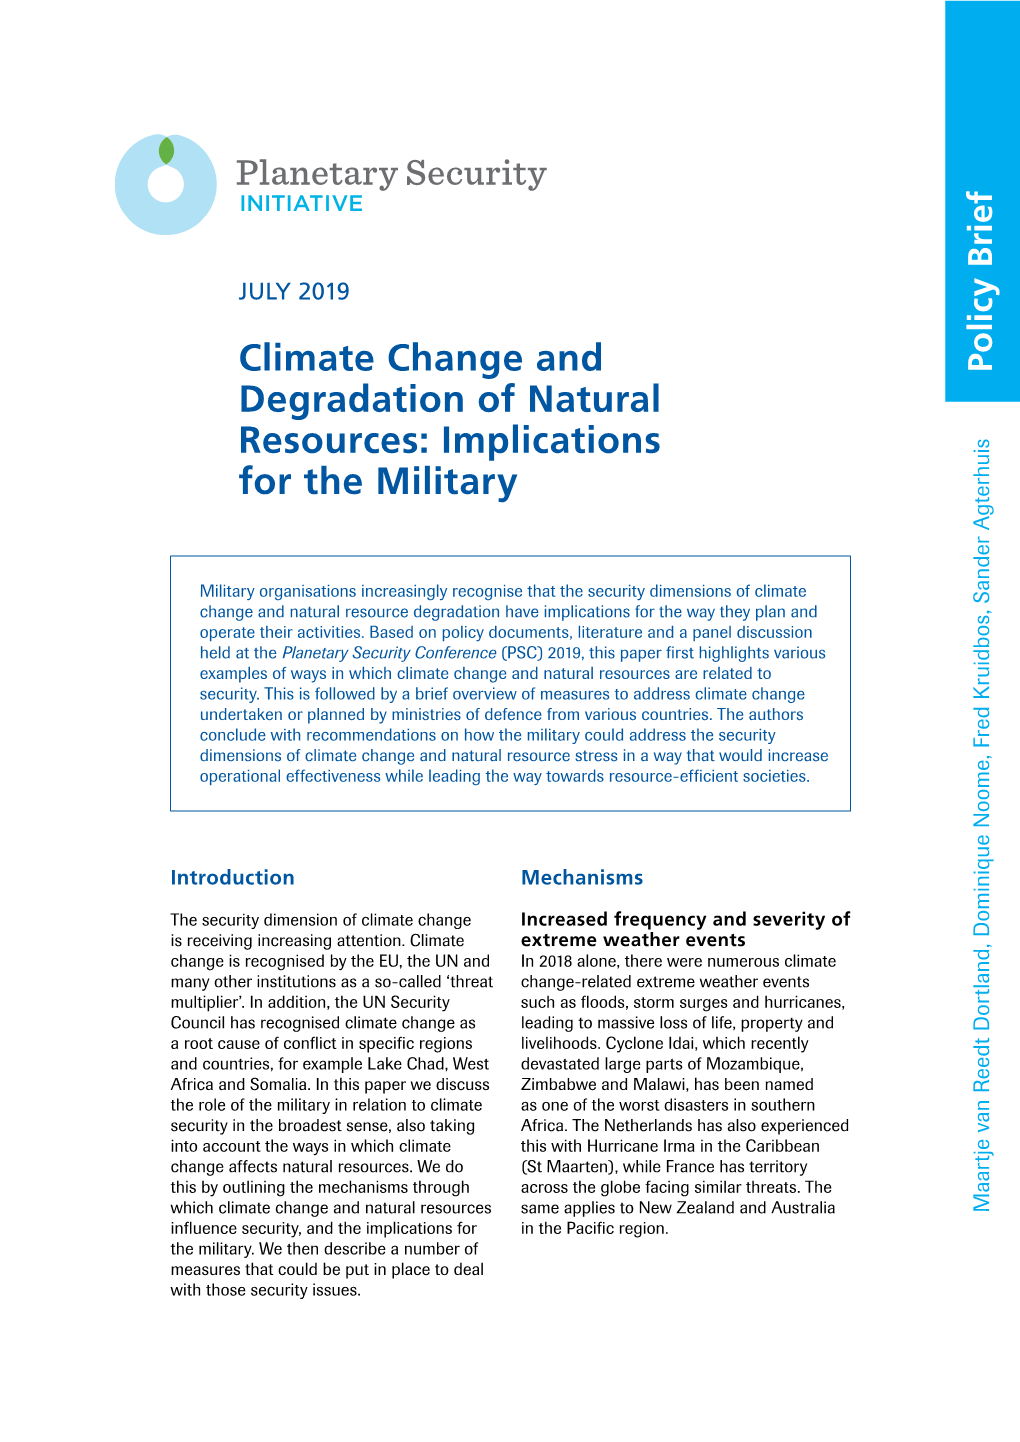 Climate Change and Degradation of Natural Resources: Implications For